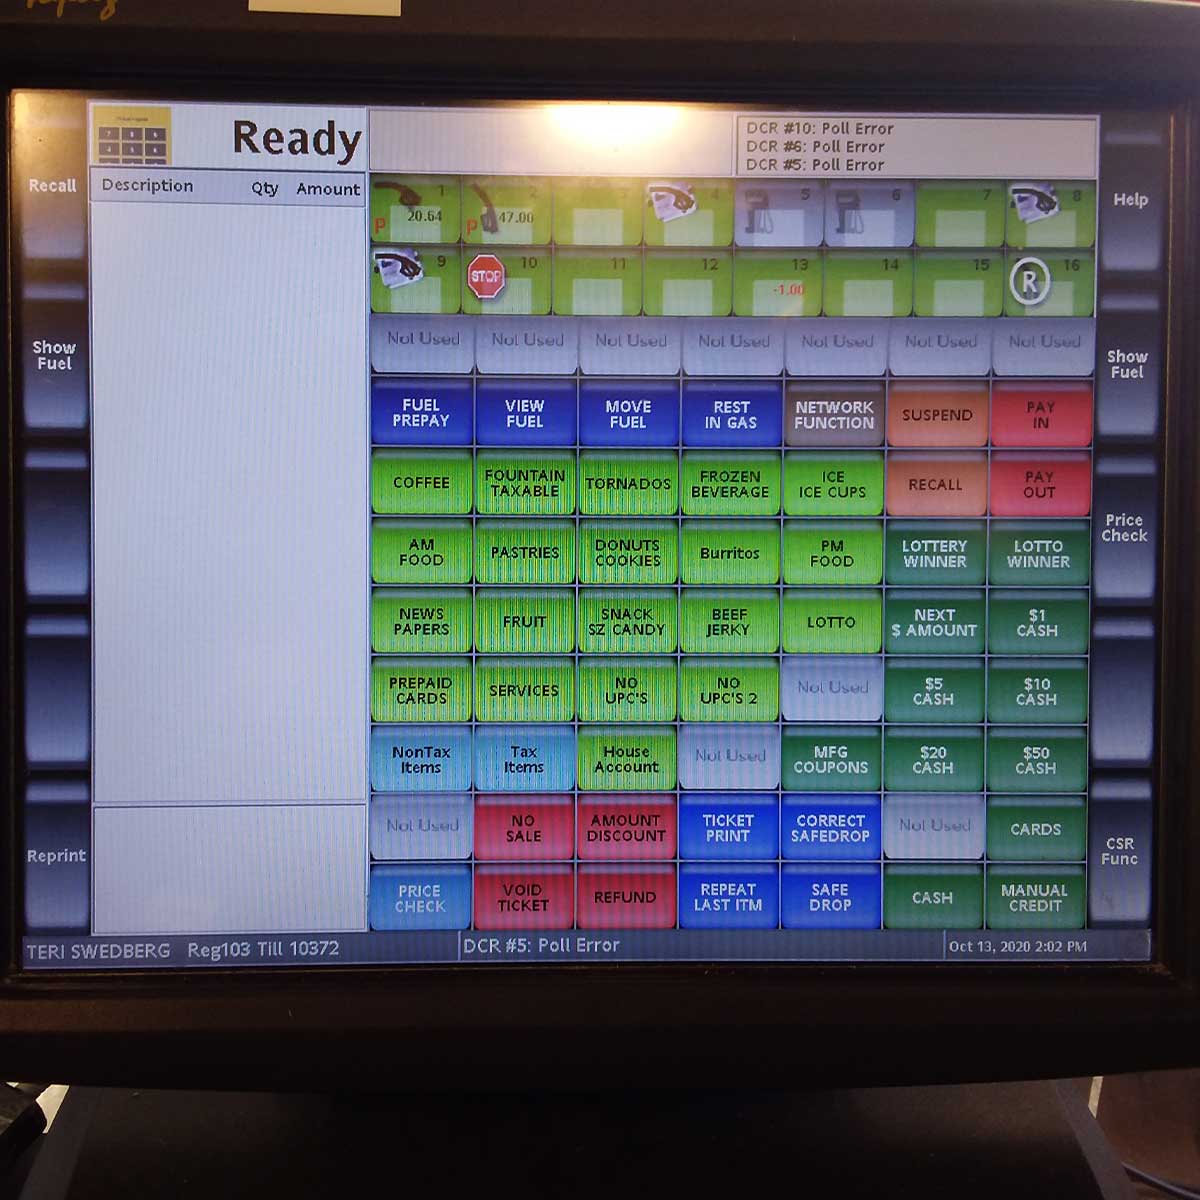 CDASSE - Point of Sale System on gas station counter - Close up of screen